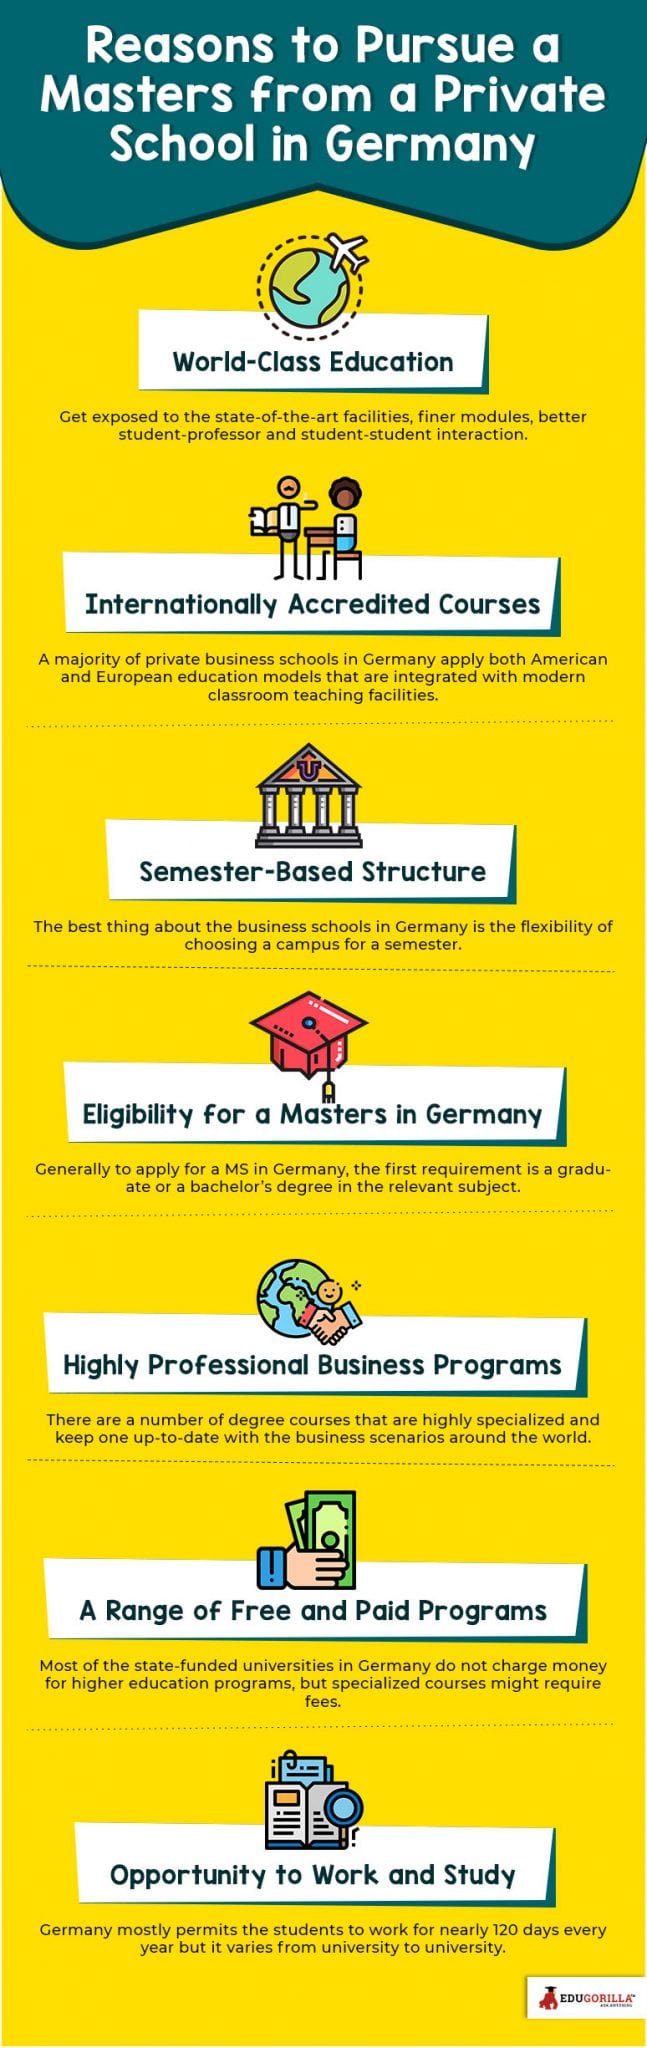 Reasons to Pursue a Masters from a Private School in Germany